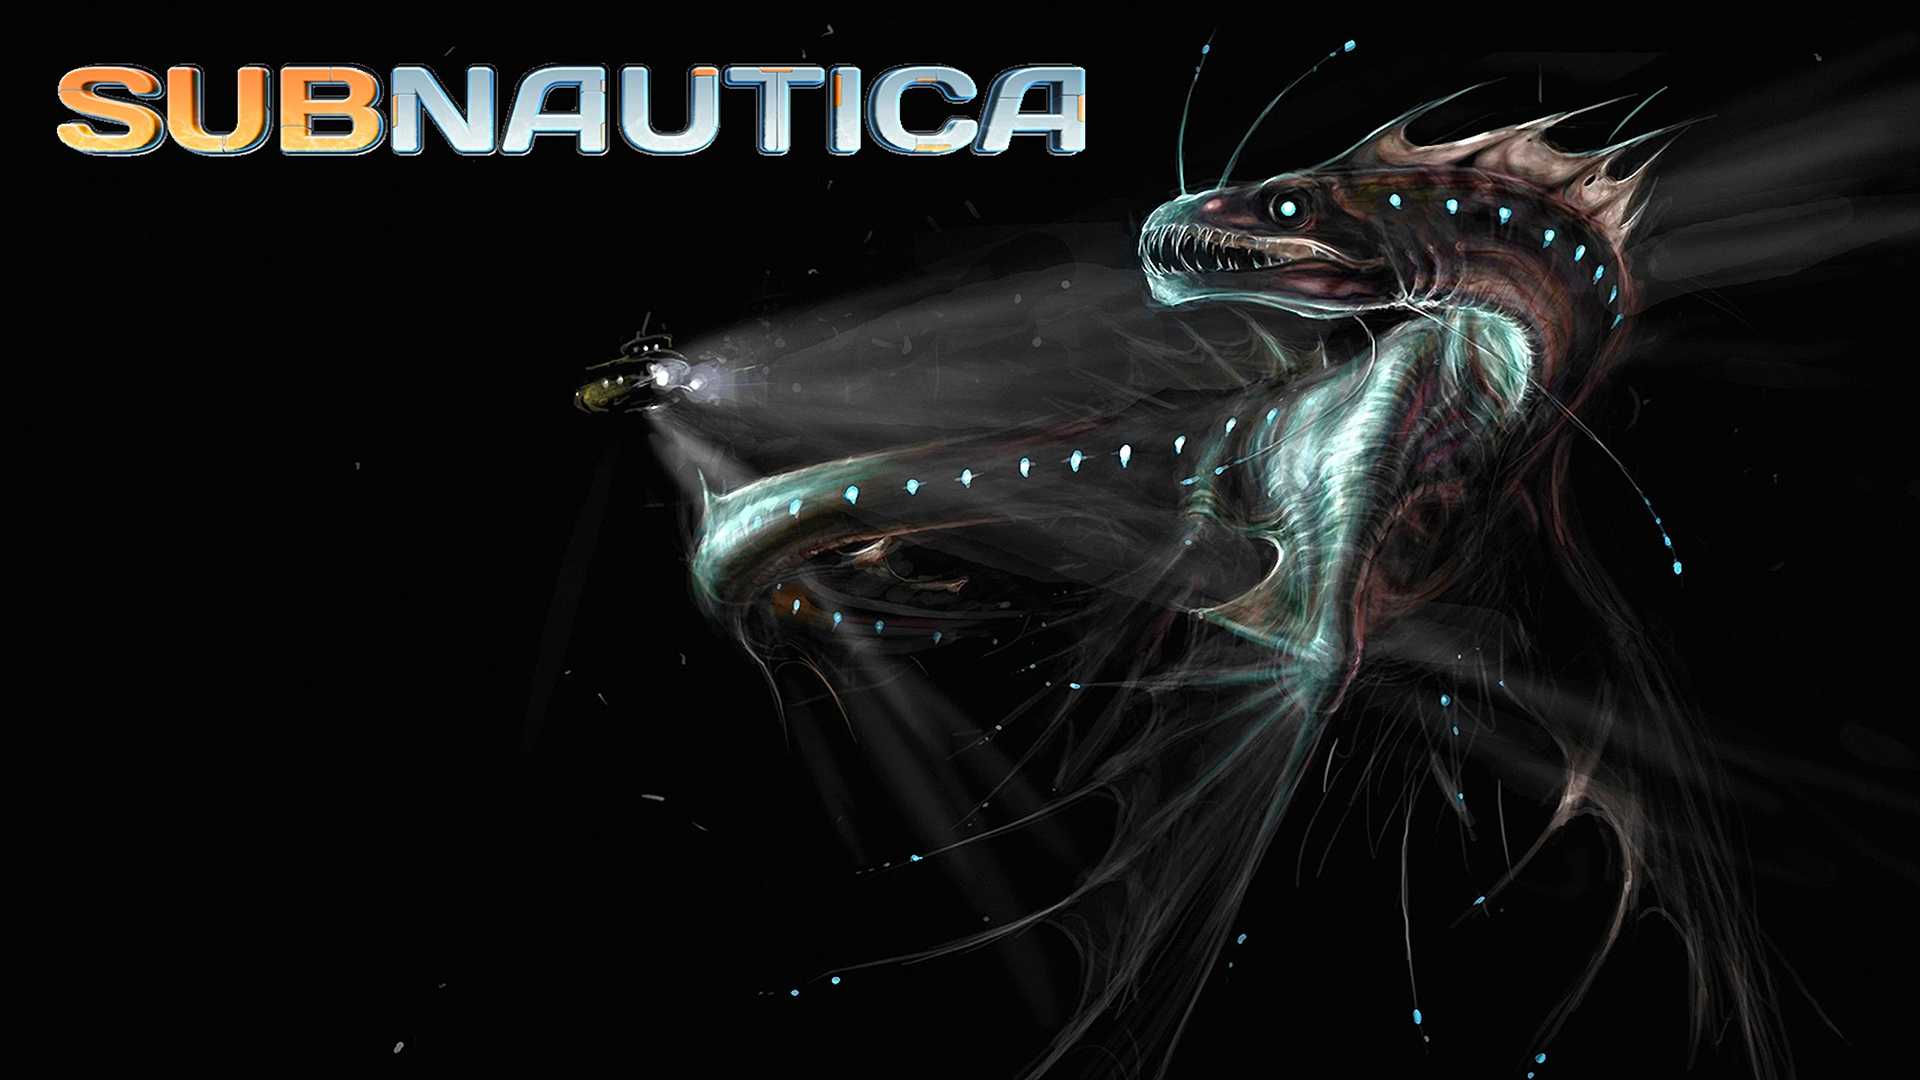 Subnautica сетчатое. Левиафан Гаргантюа субнаутика. Субнатика Левиафан Гаргантюа. Левиафан хищник сабнатика. Левиафан Subnautica.